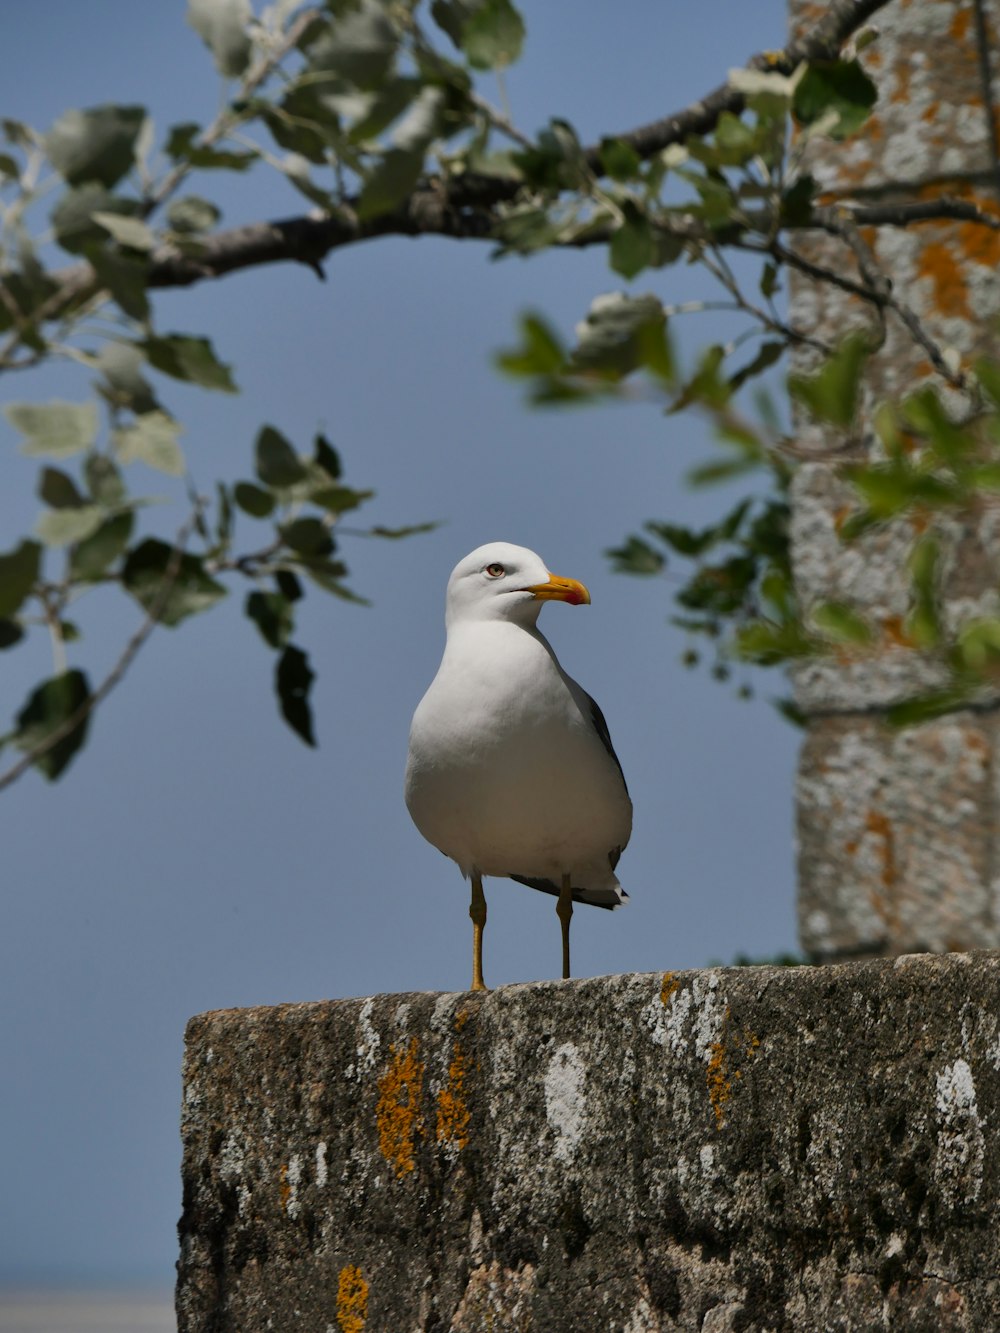 a seagull is standing on a concrete ledge